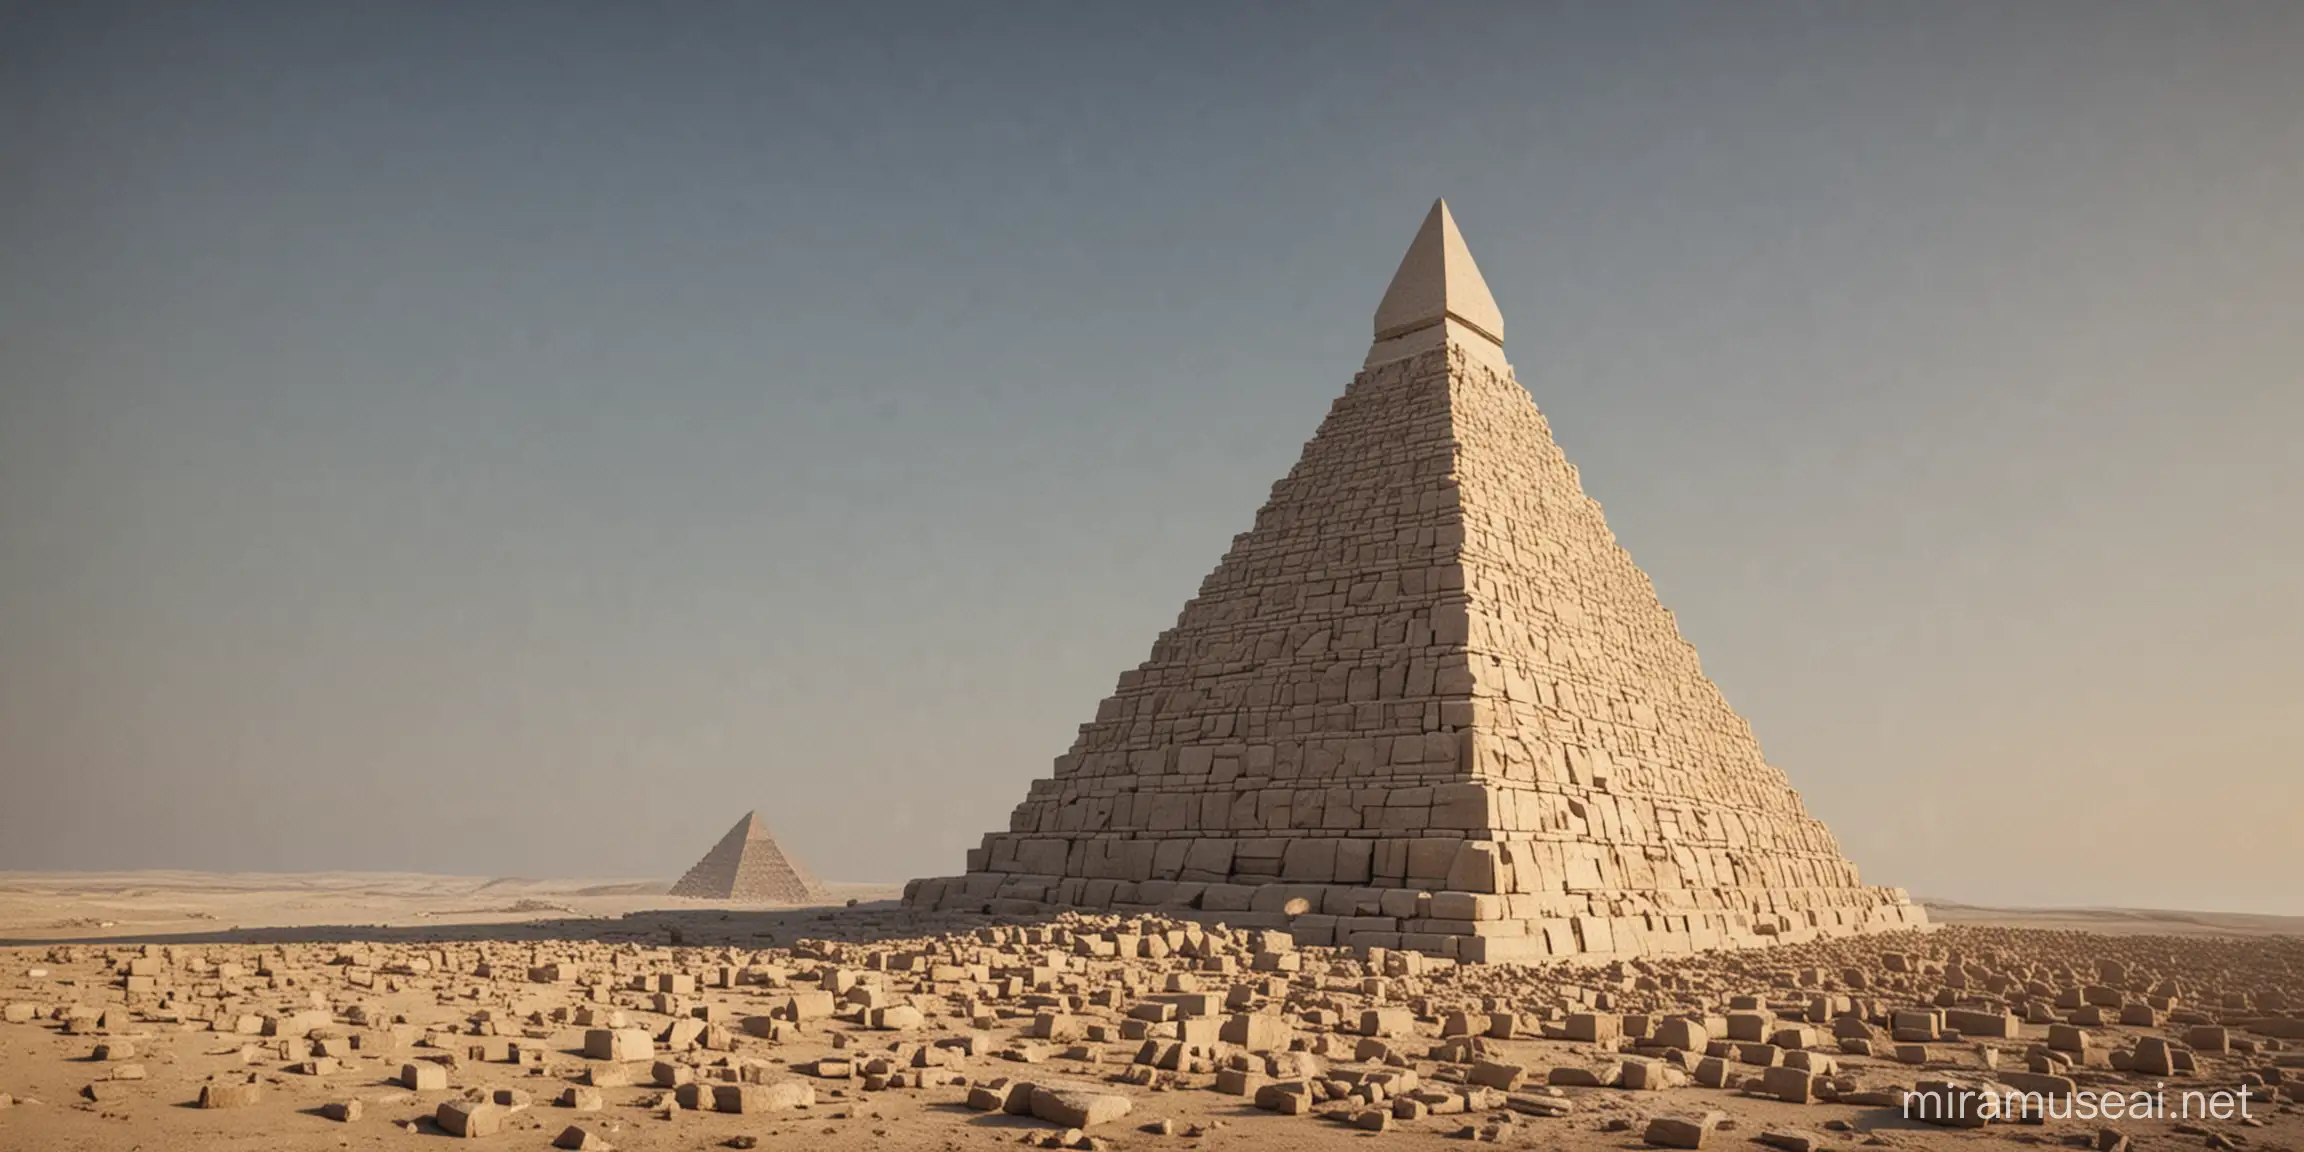 Create a Monument inspired by term Pyramid of Serenity
